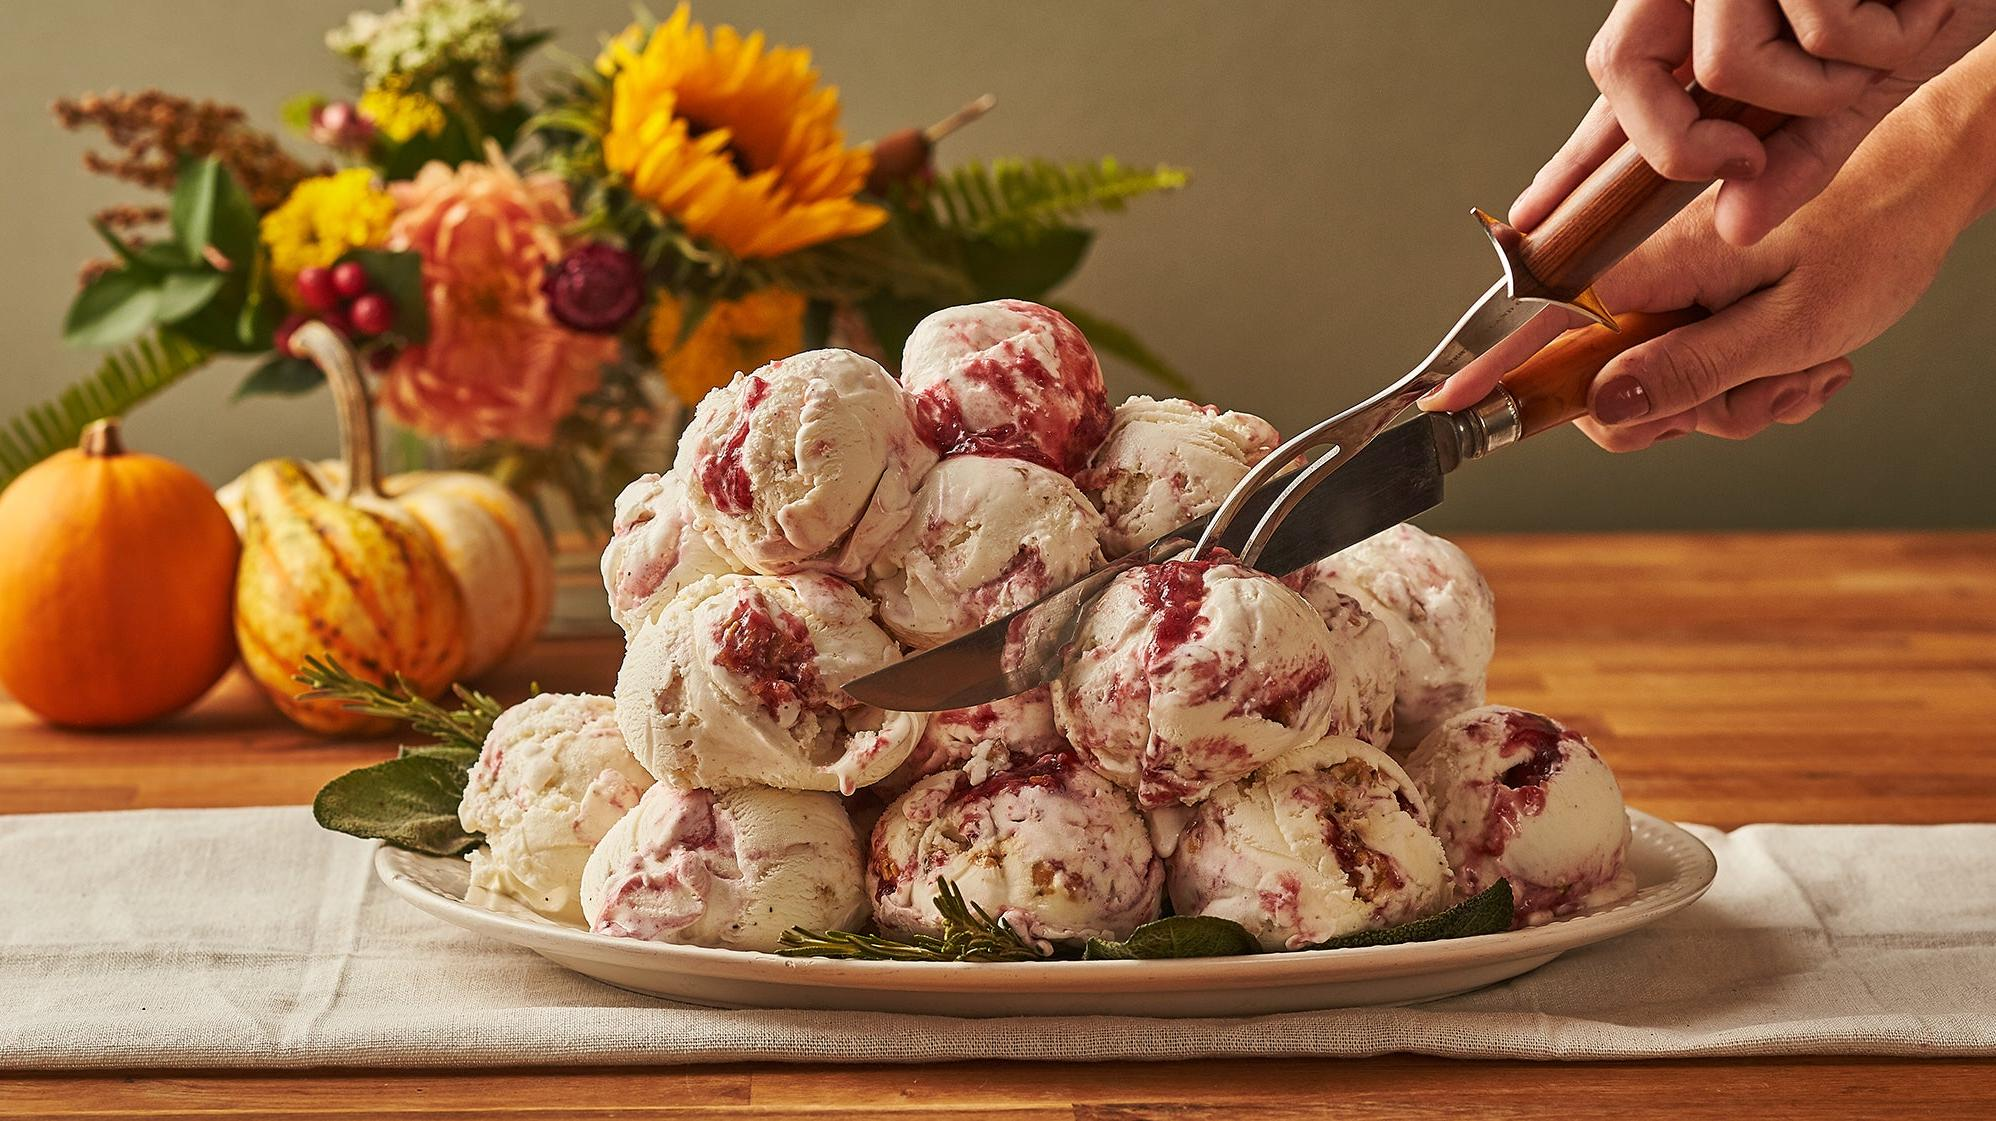 Turkey Cranberry ice cream being carved up like a Thanksgiving turkey